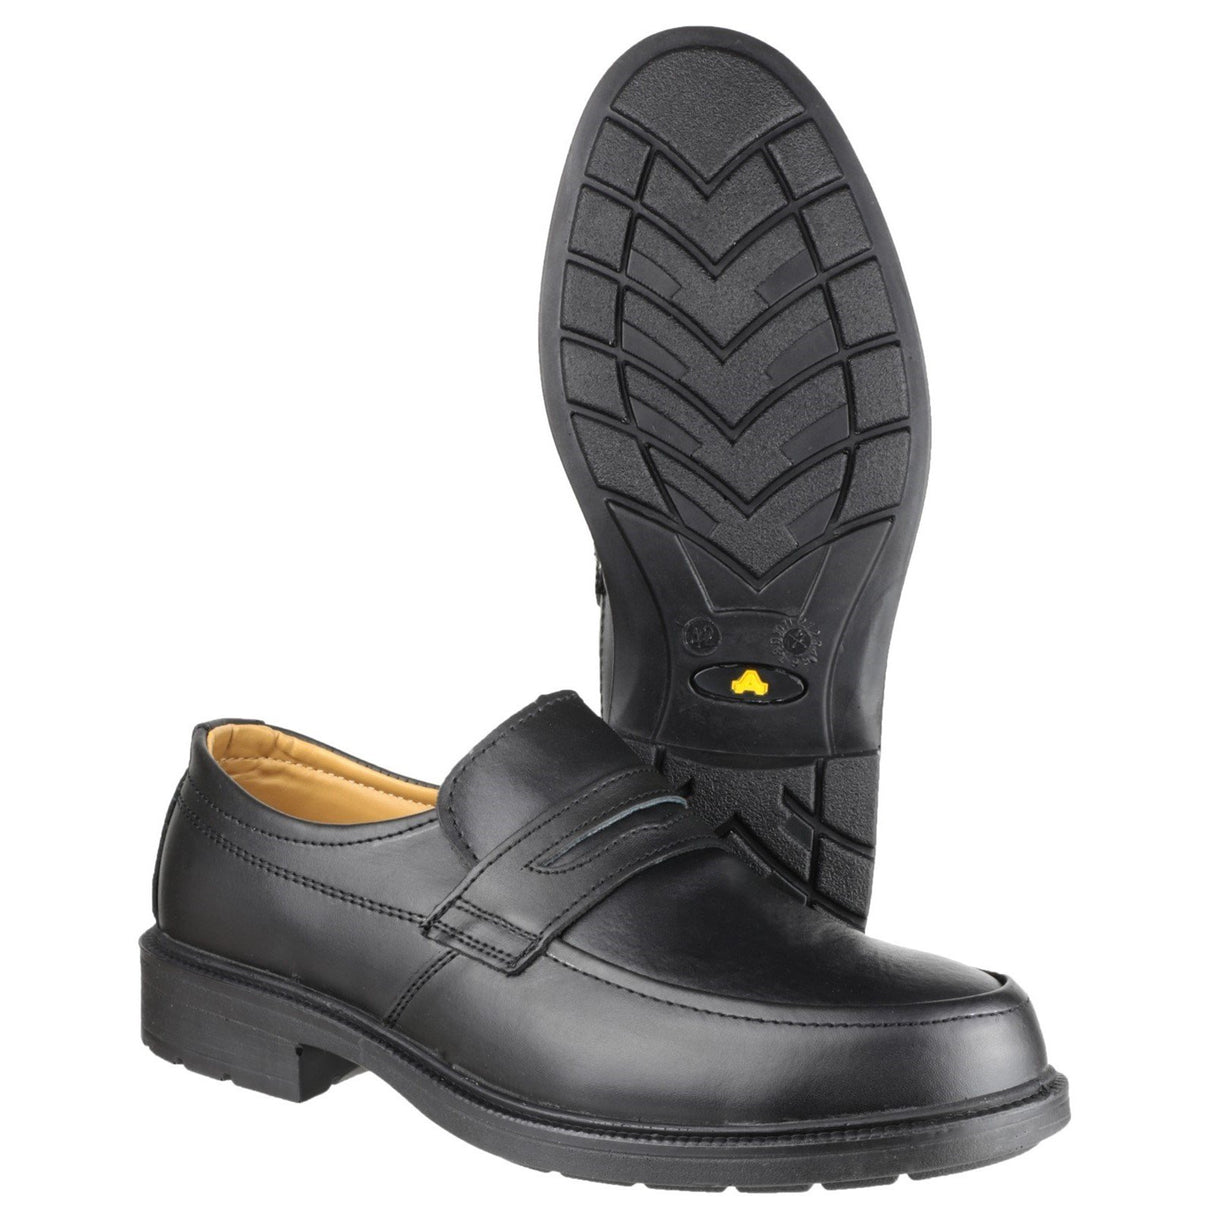 Amblers Safety Slip On Safety Shoes